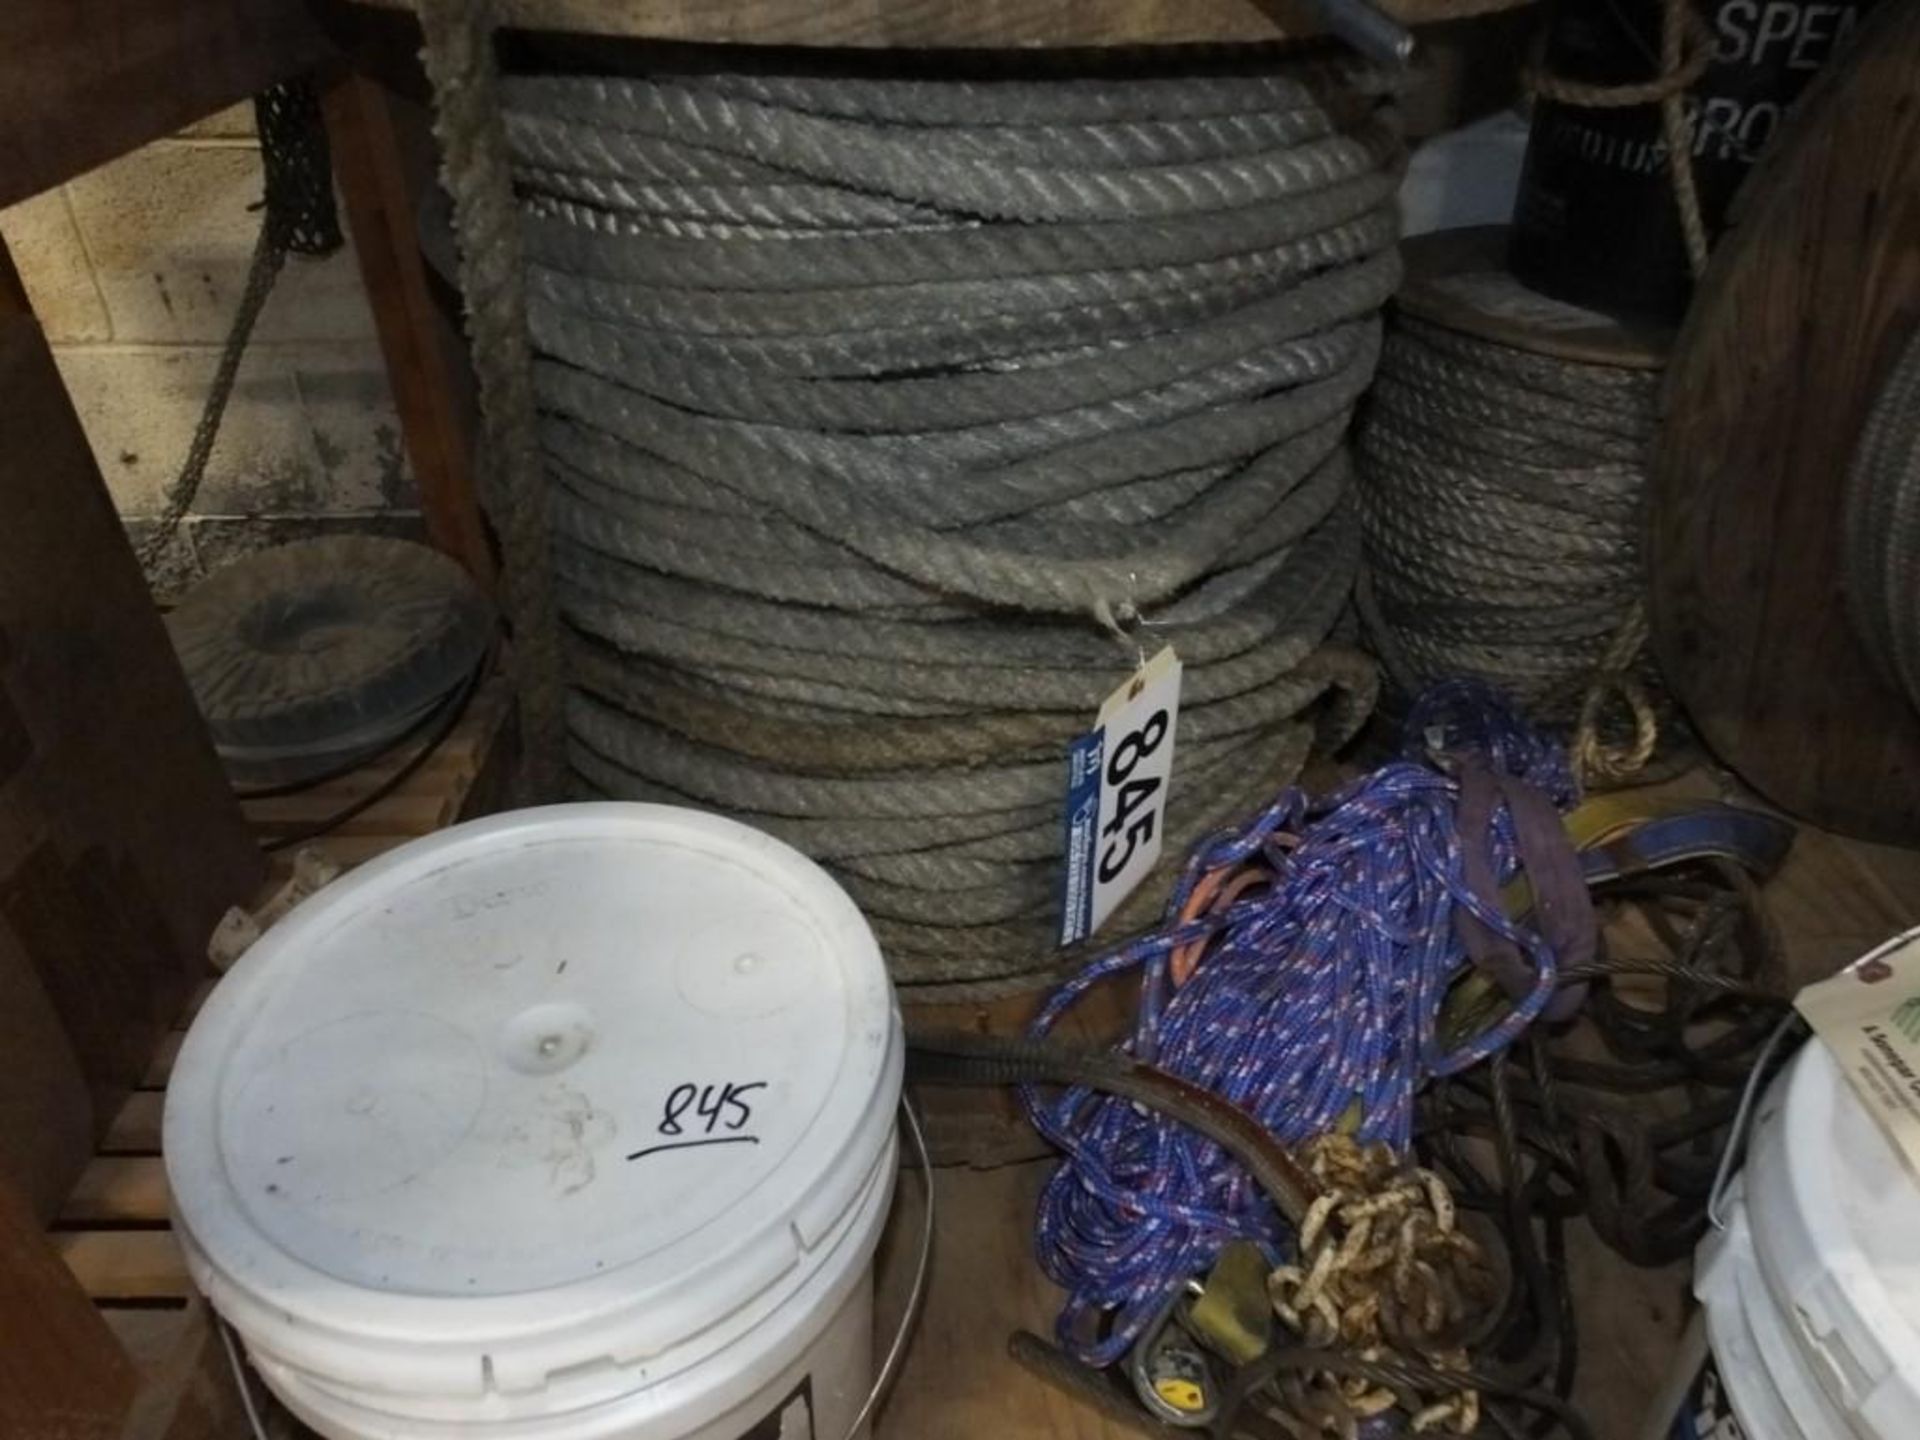 2 Spools Twisted Pull Line and Lubricant